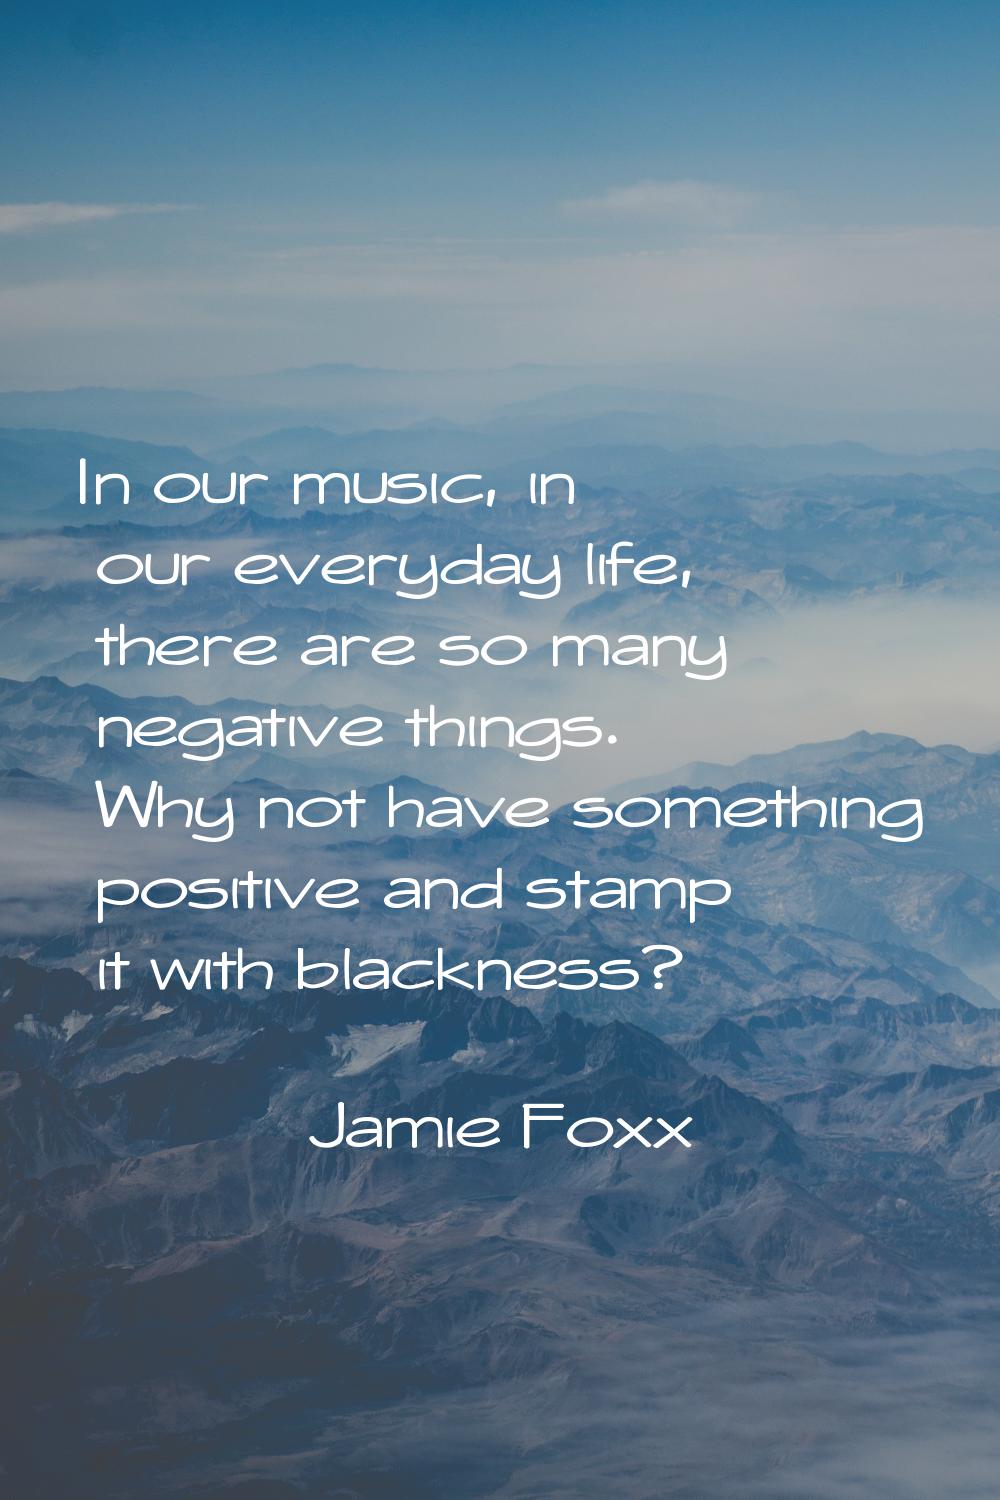 In our music, in our everyday life, there are so many negative things. Why not have something posit